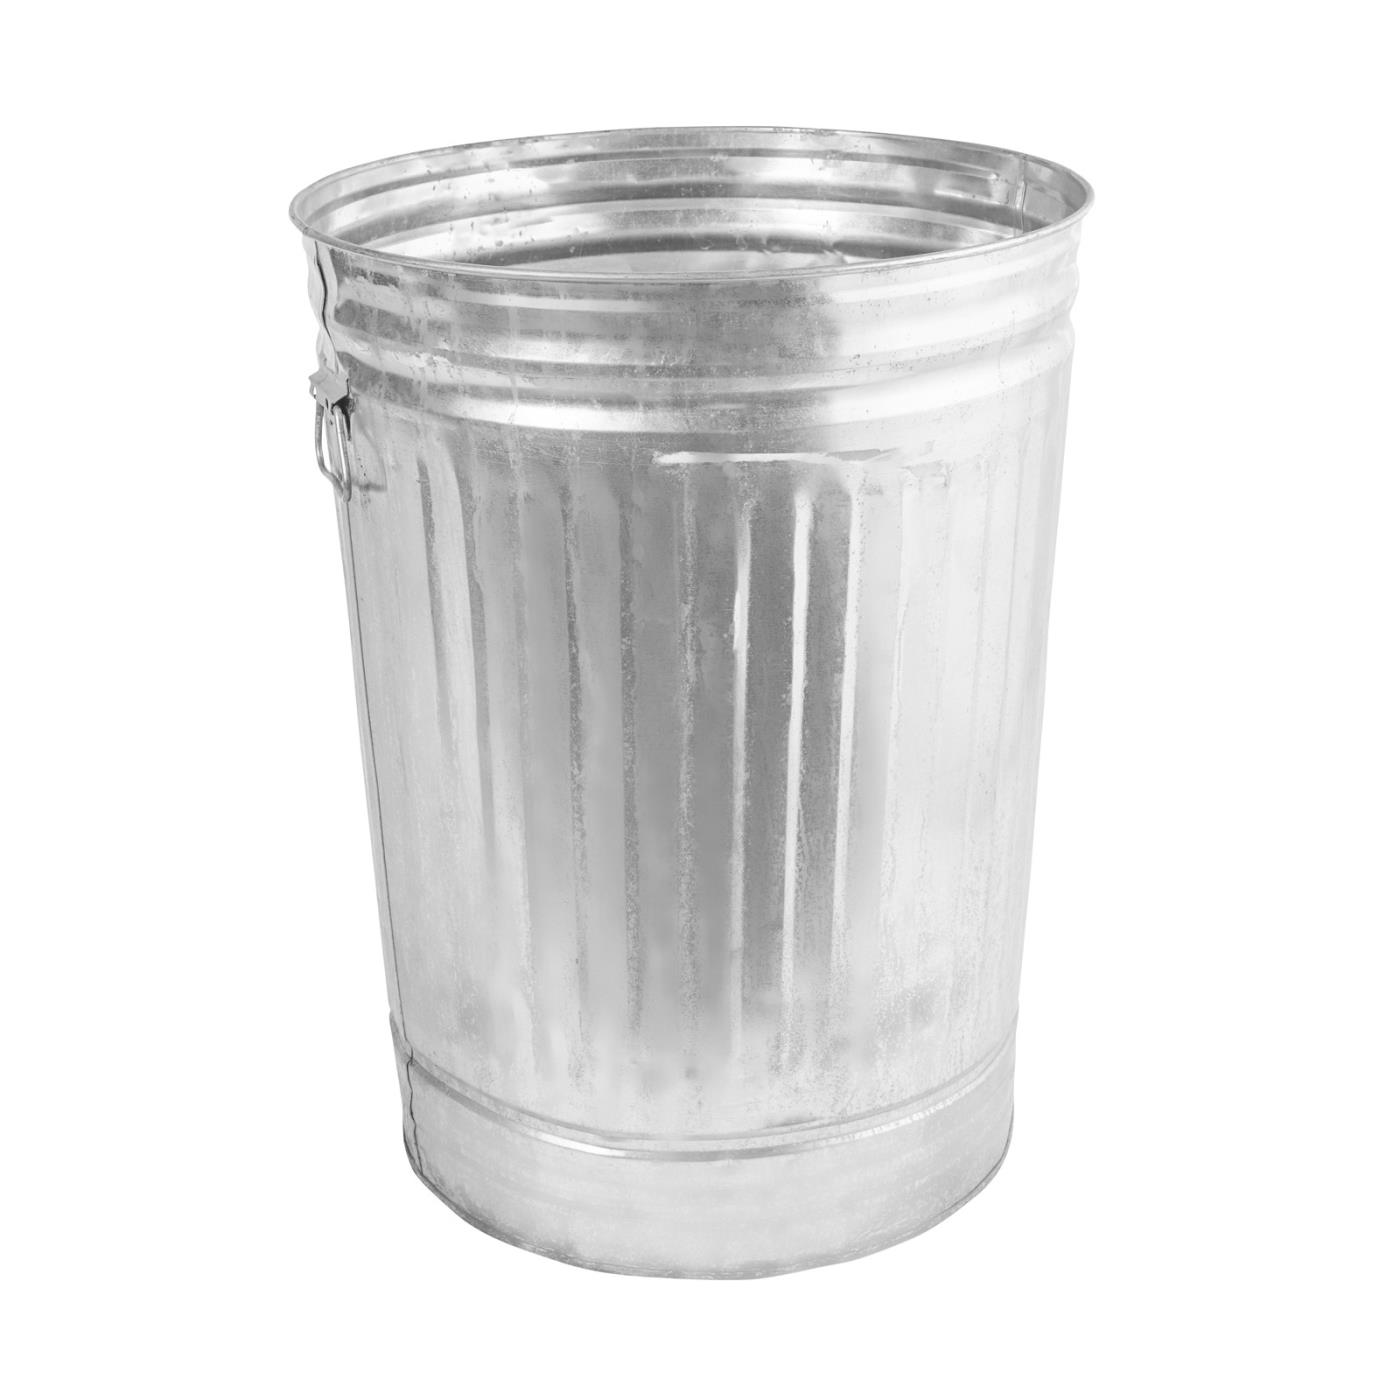 Garbage Cans - Aluminum